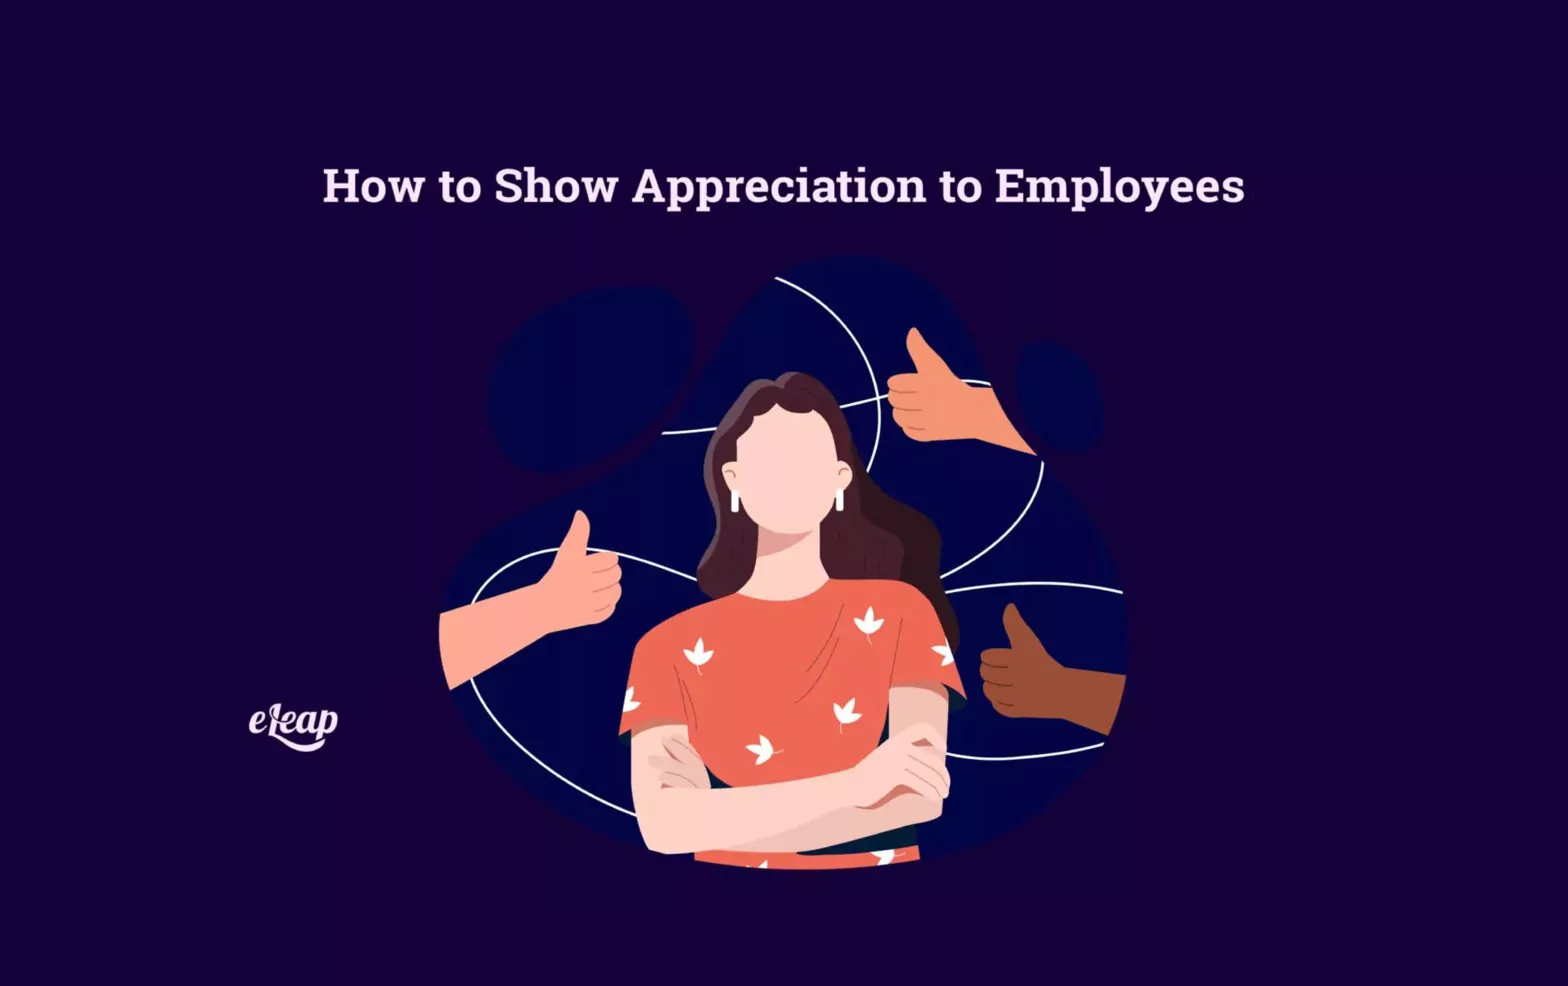 How to Show Appreciation to Employees